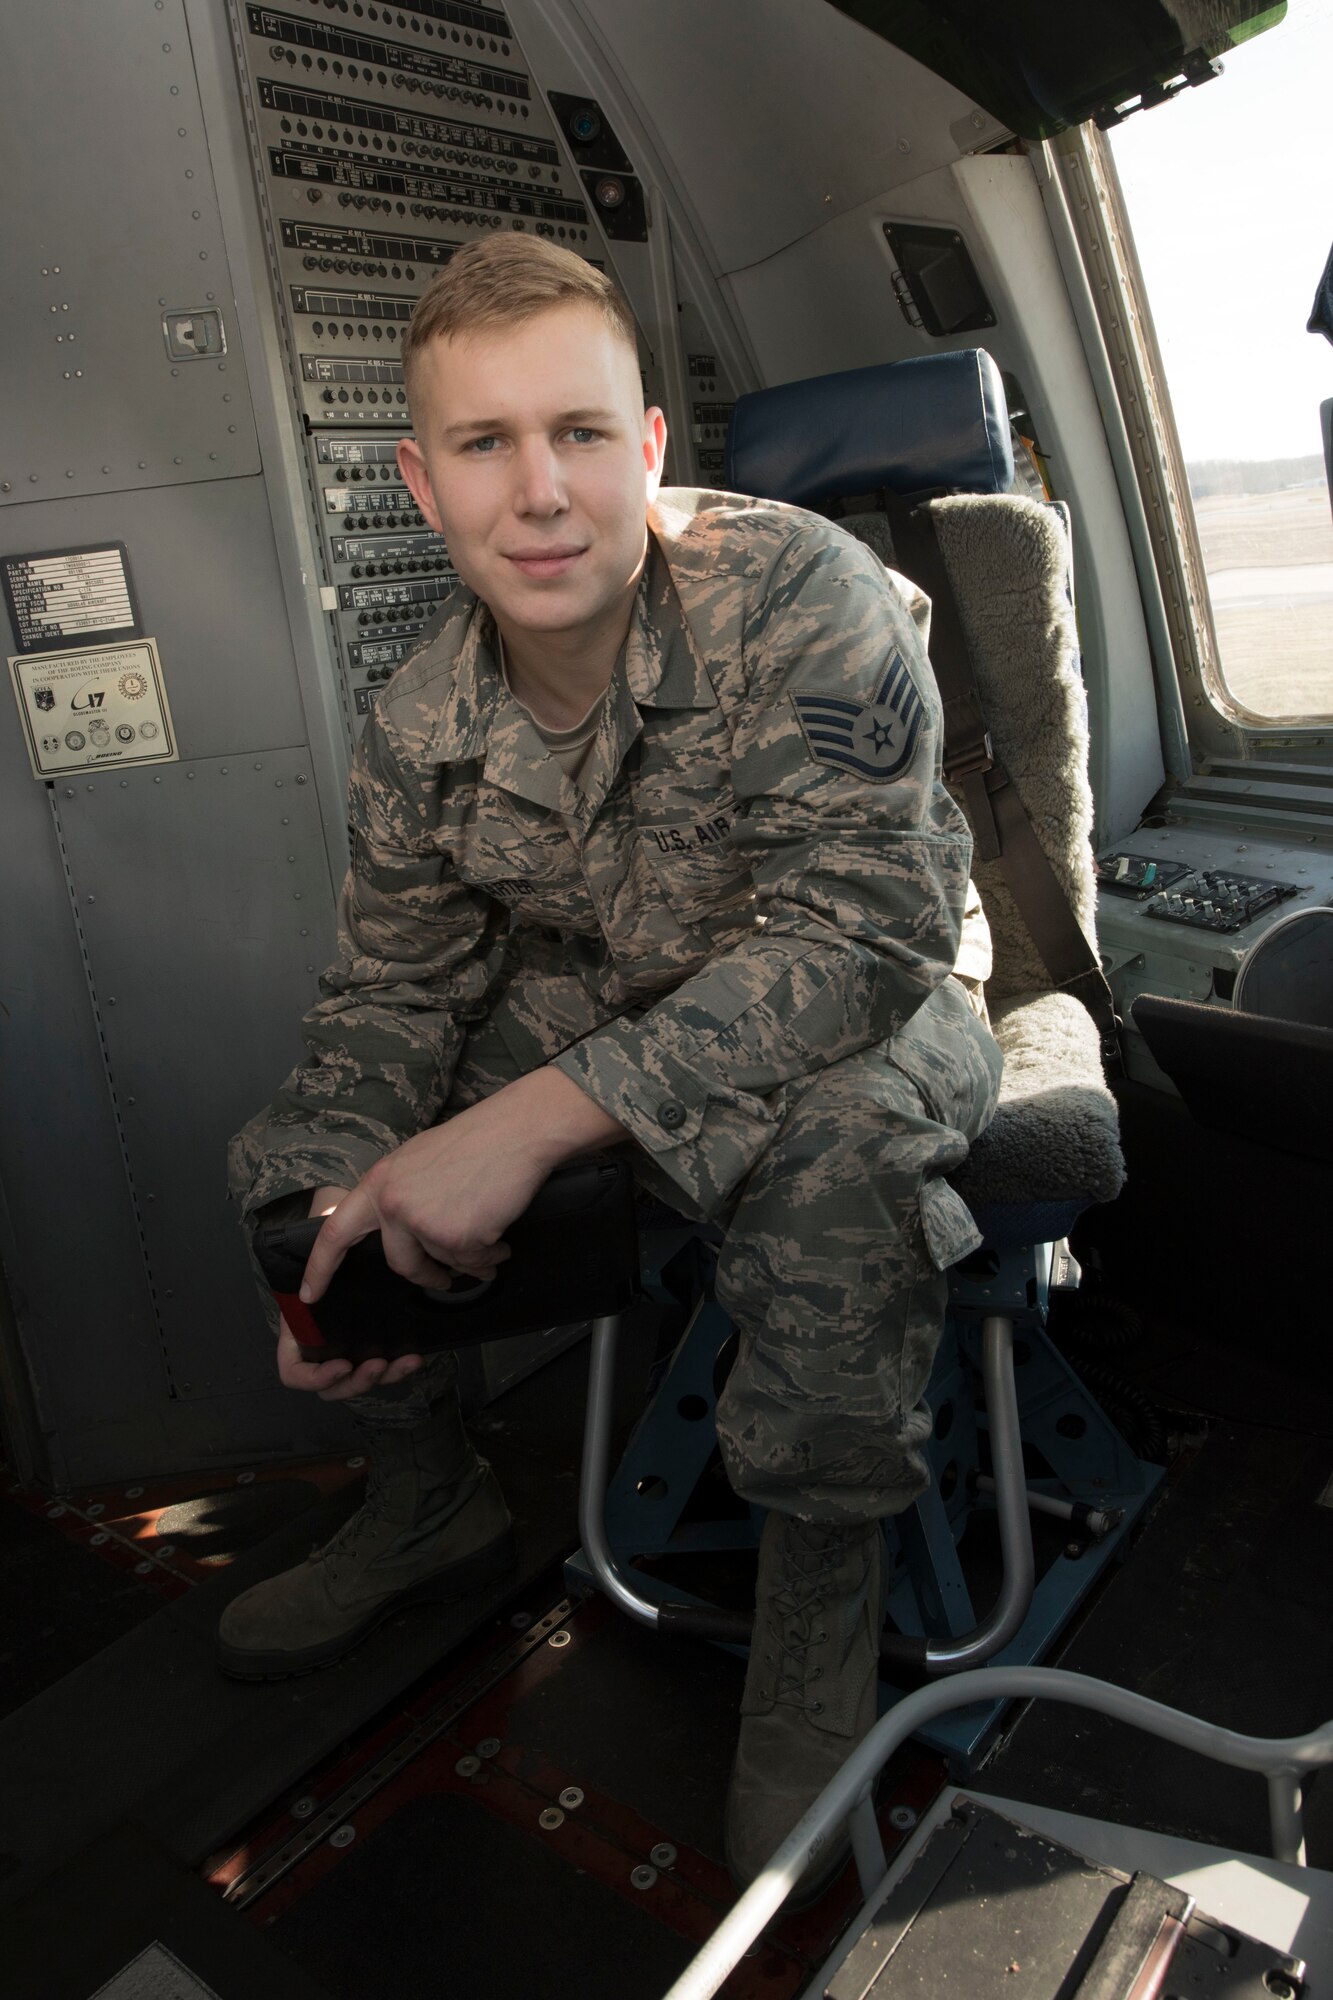 Staff Sgt. Dennis Carter is an integrated avionics systems mechanic for the 167th Airlift Wing. He is the wing's Airman Spotlight for January 2018. (U.S. Air National Guard photo by Senior Master Sgt. Emily Beightol-Deyerle)